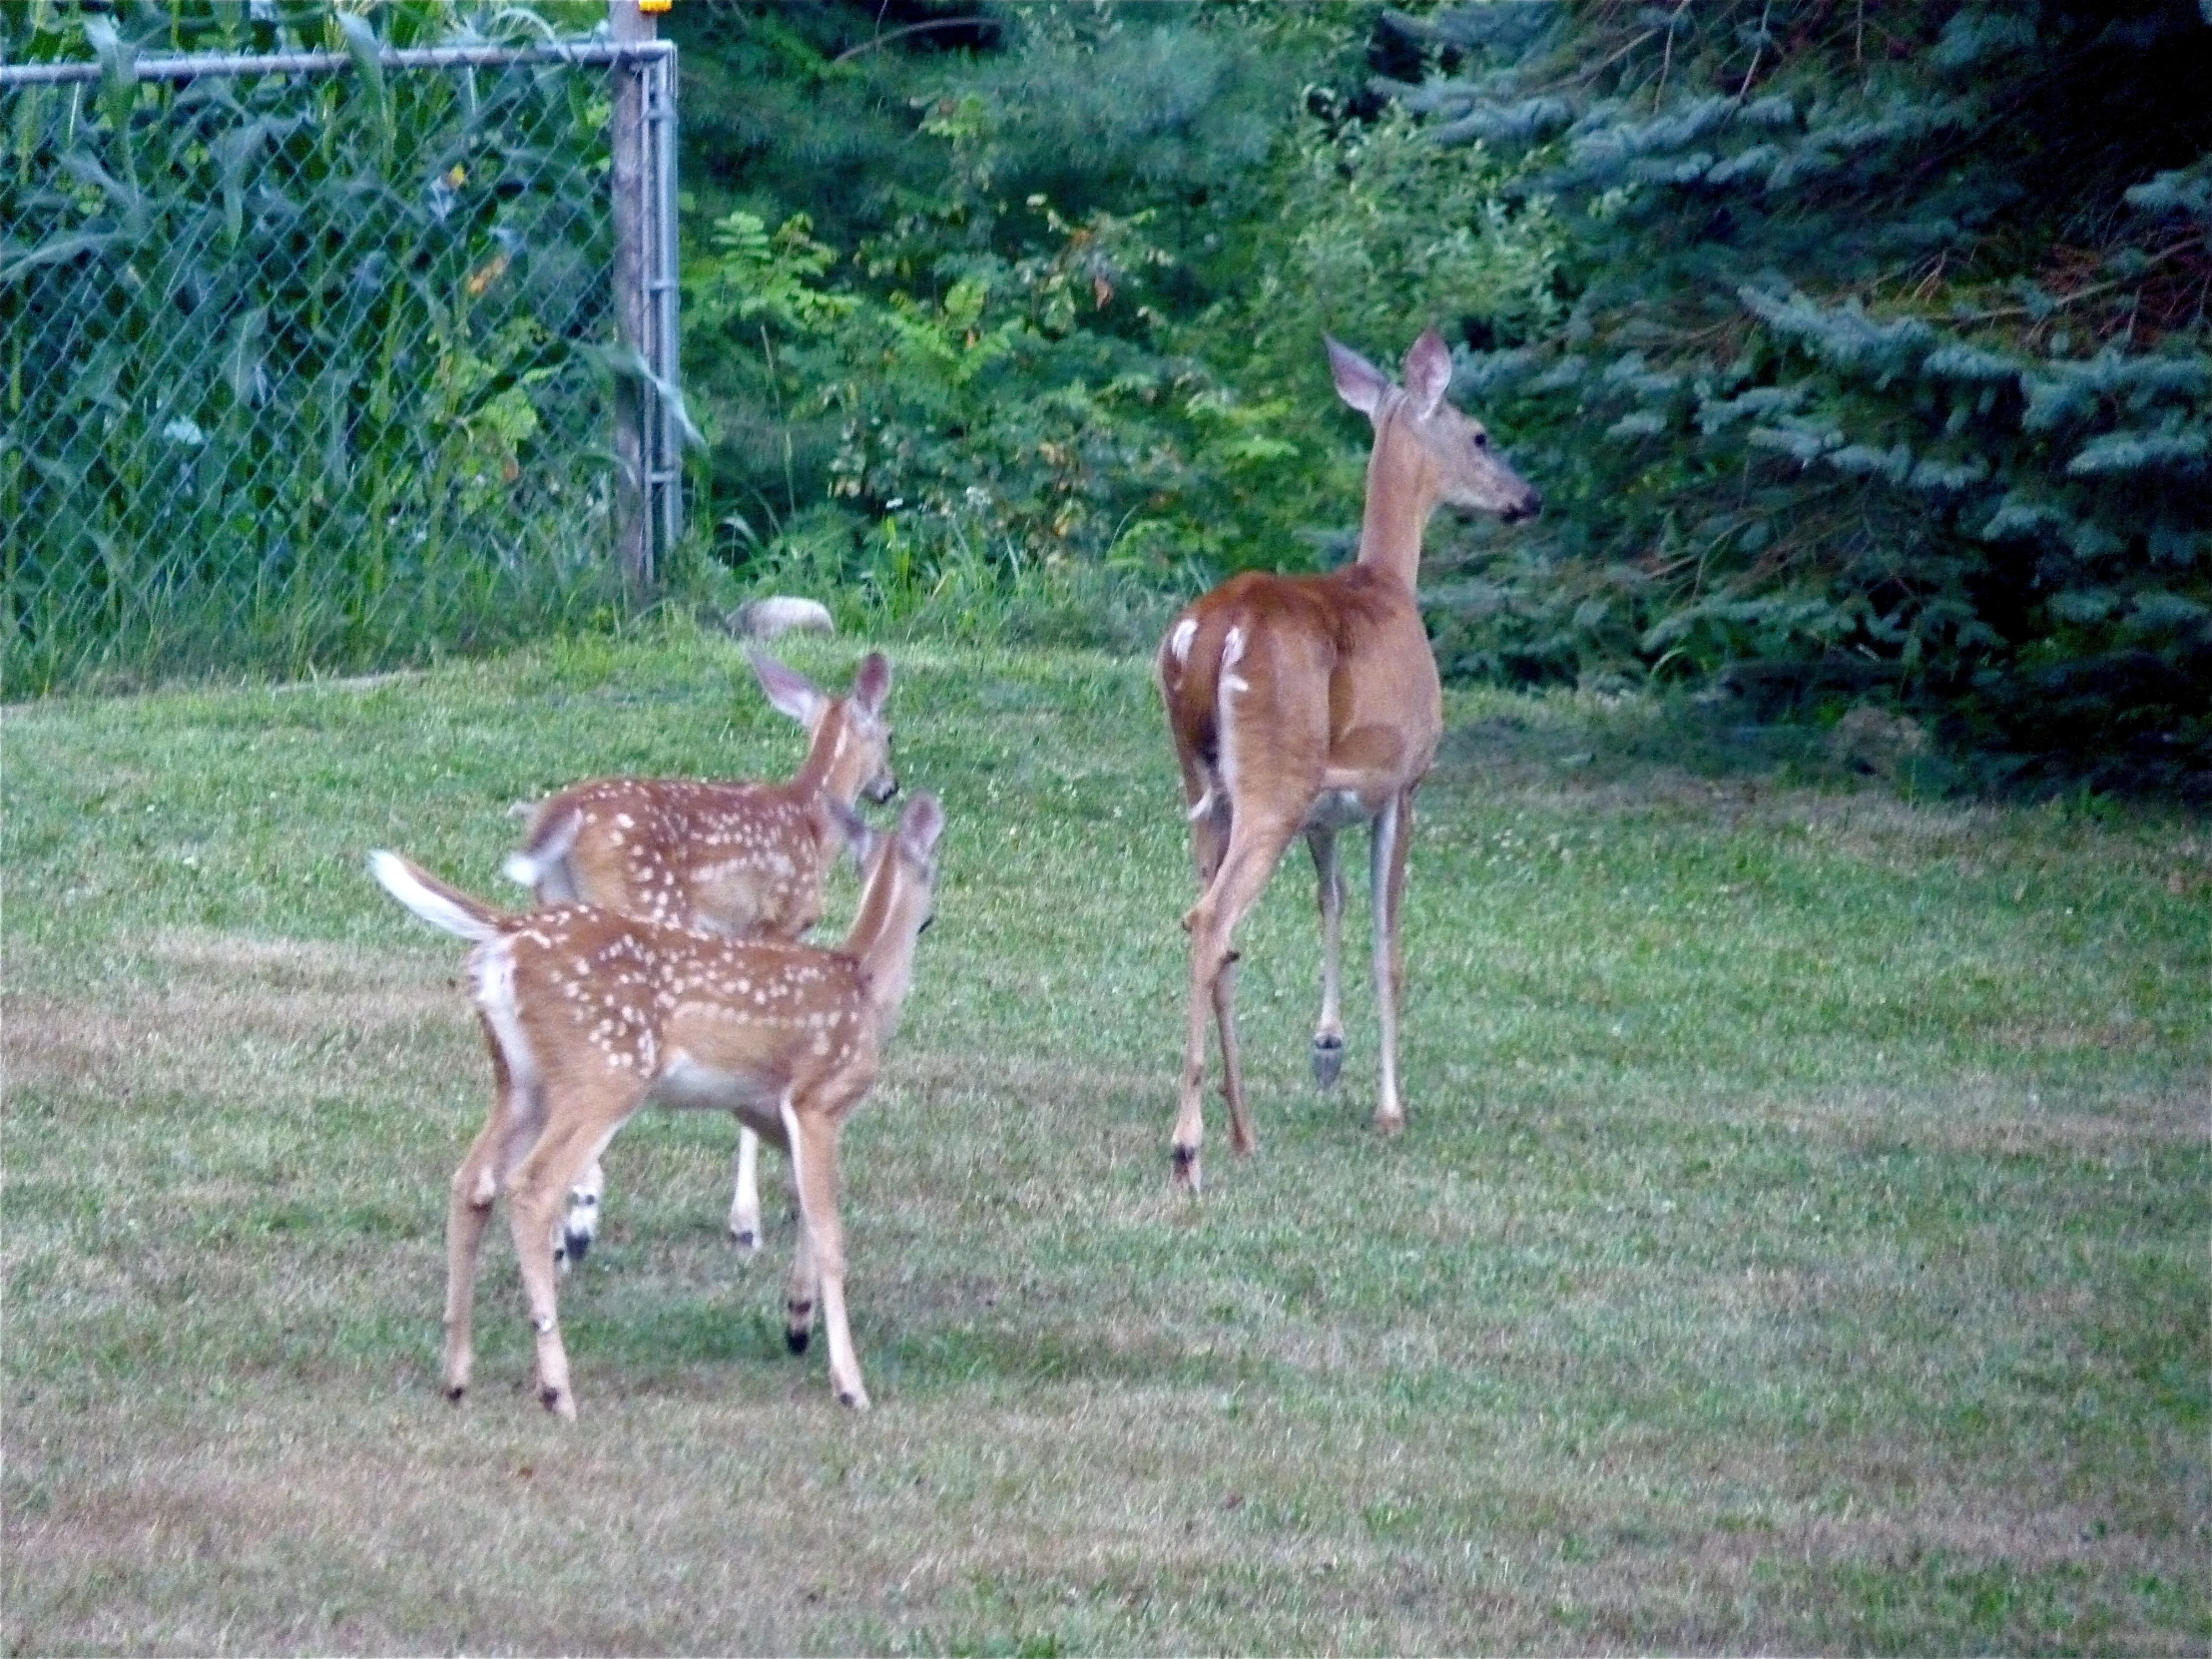 two deers standing next to each other in a yard